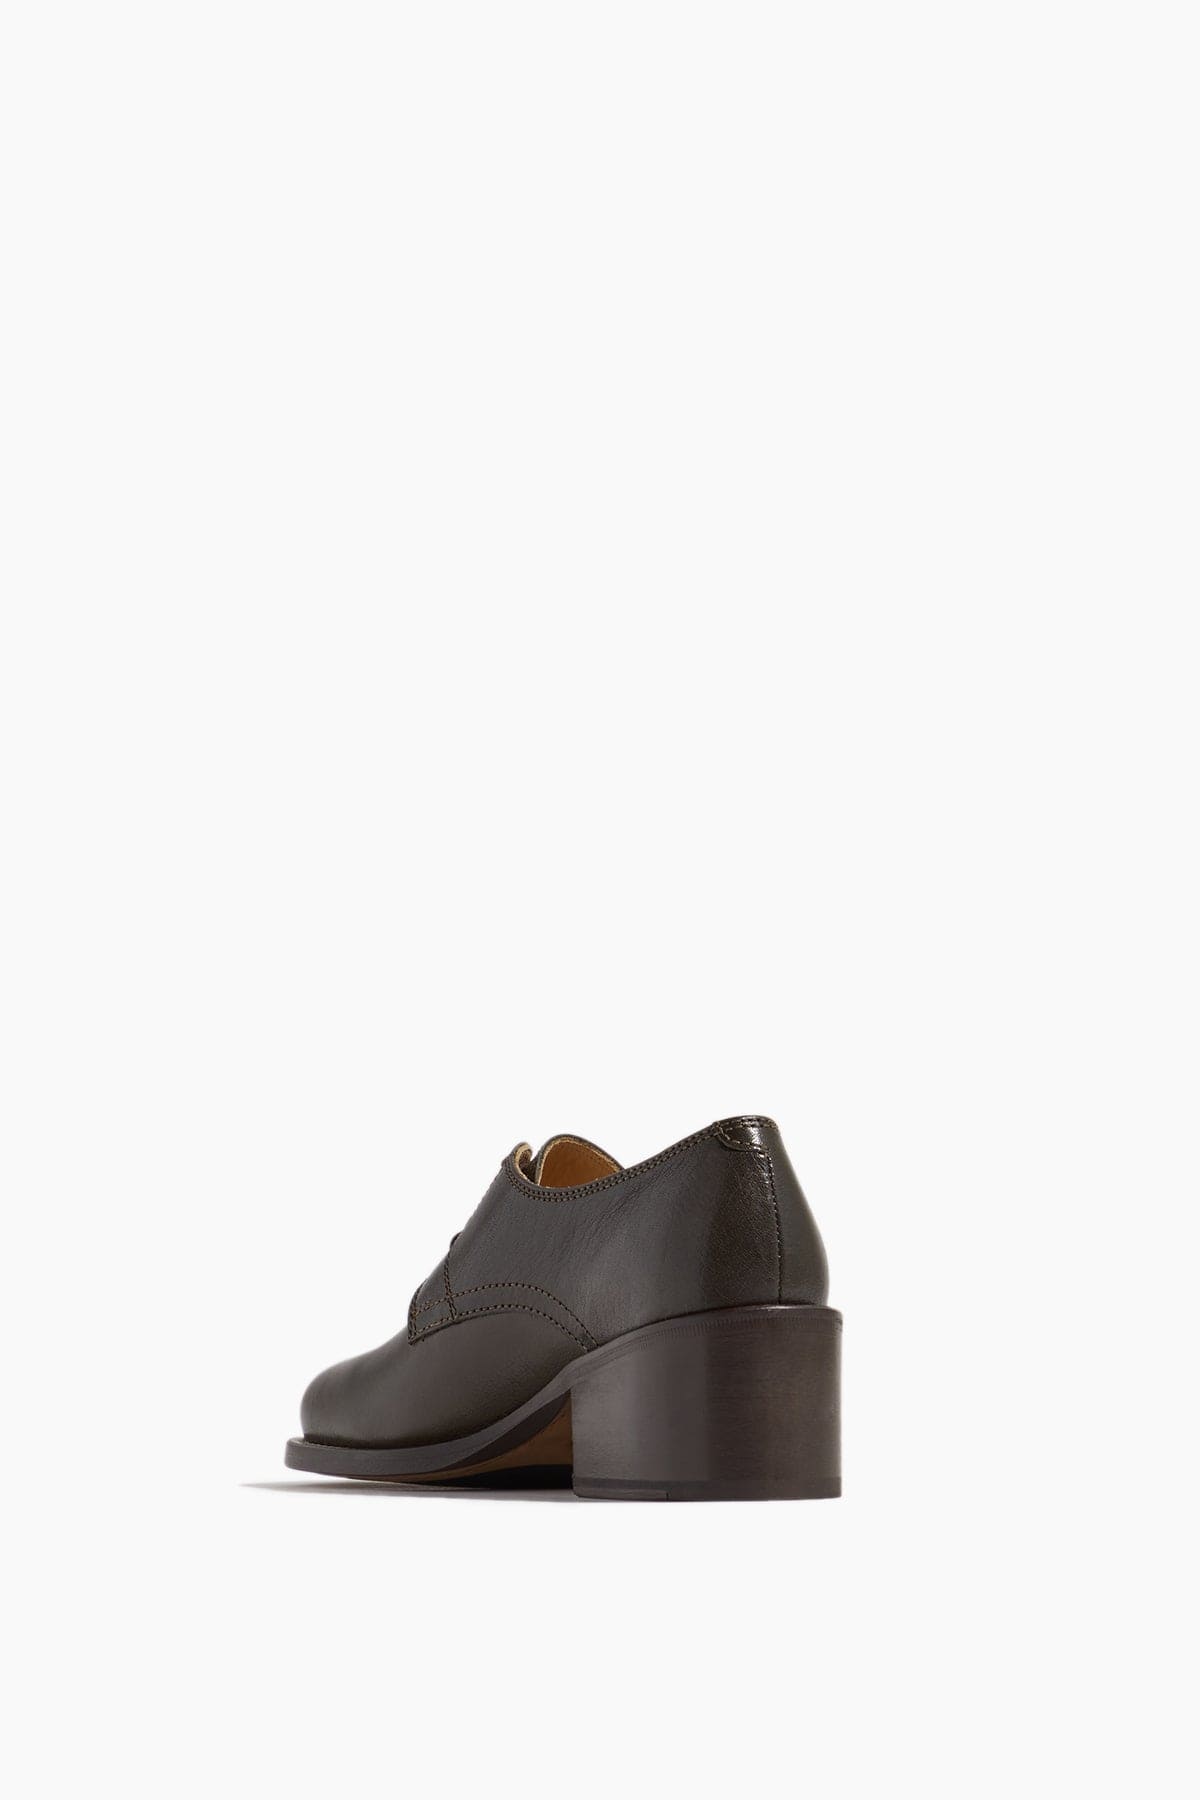 Lemaire Loafers Heeled Square Derby in Forest Brown